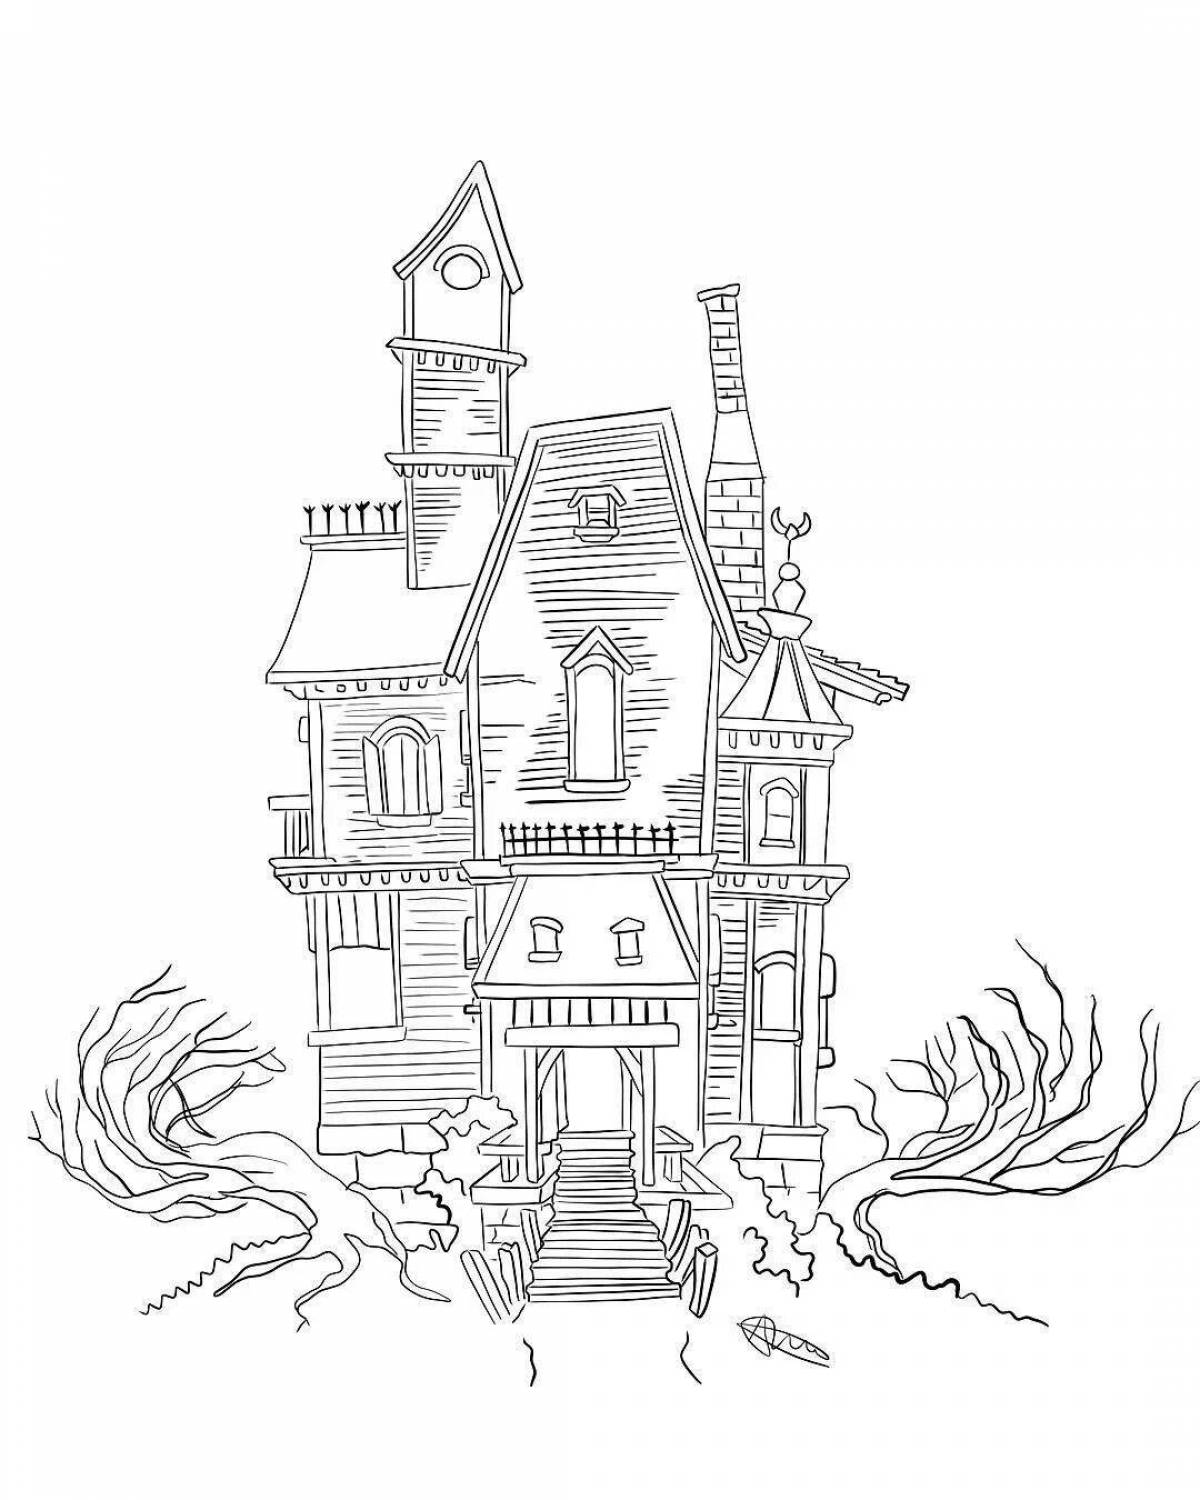 Coloring page charming homebody